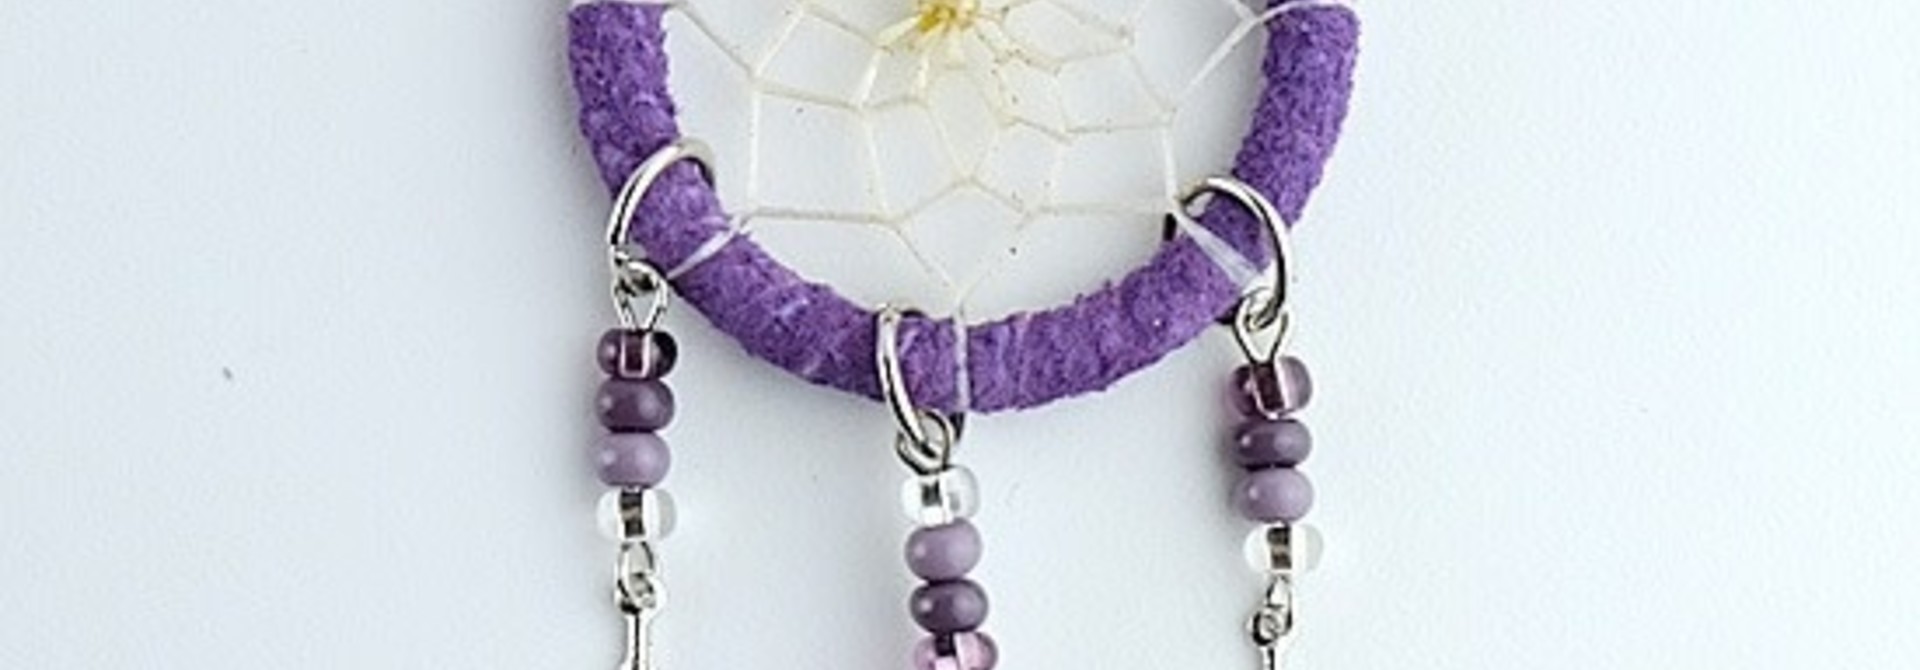 1.5" Dream catcher Purple with glass beads and metal feathers